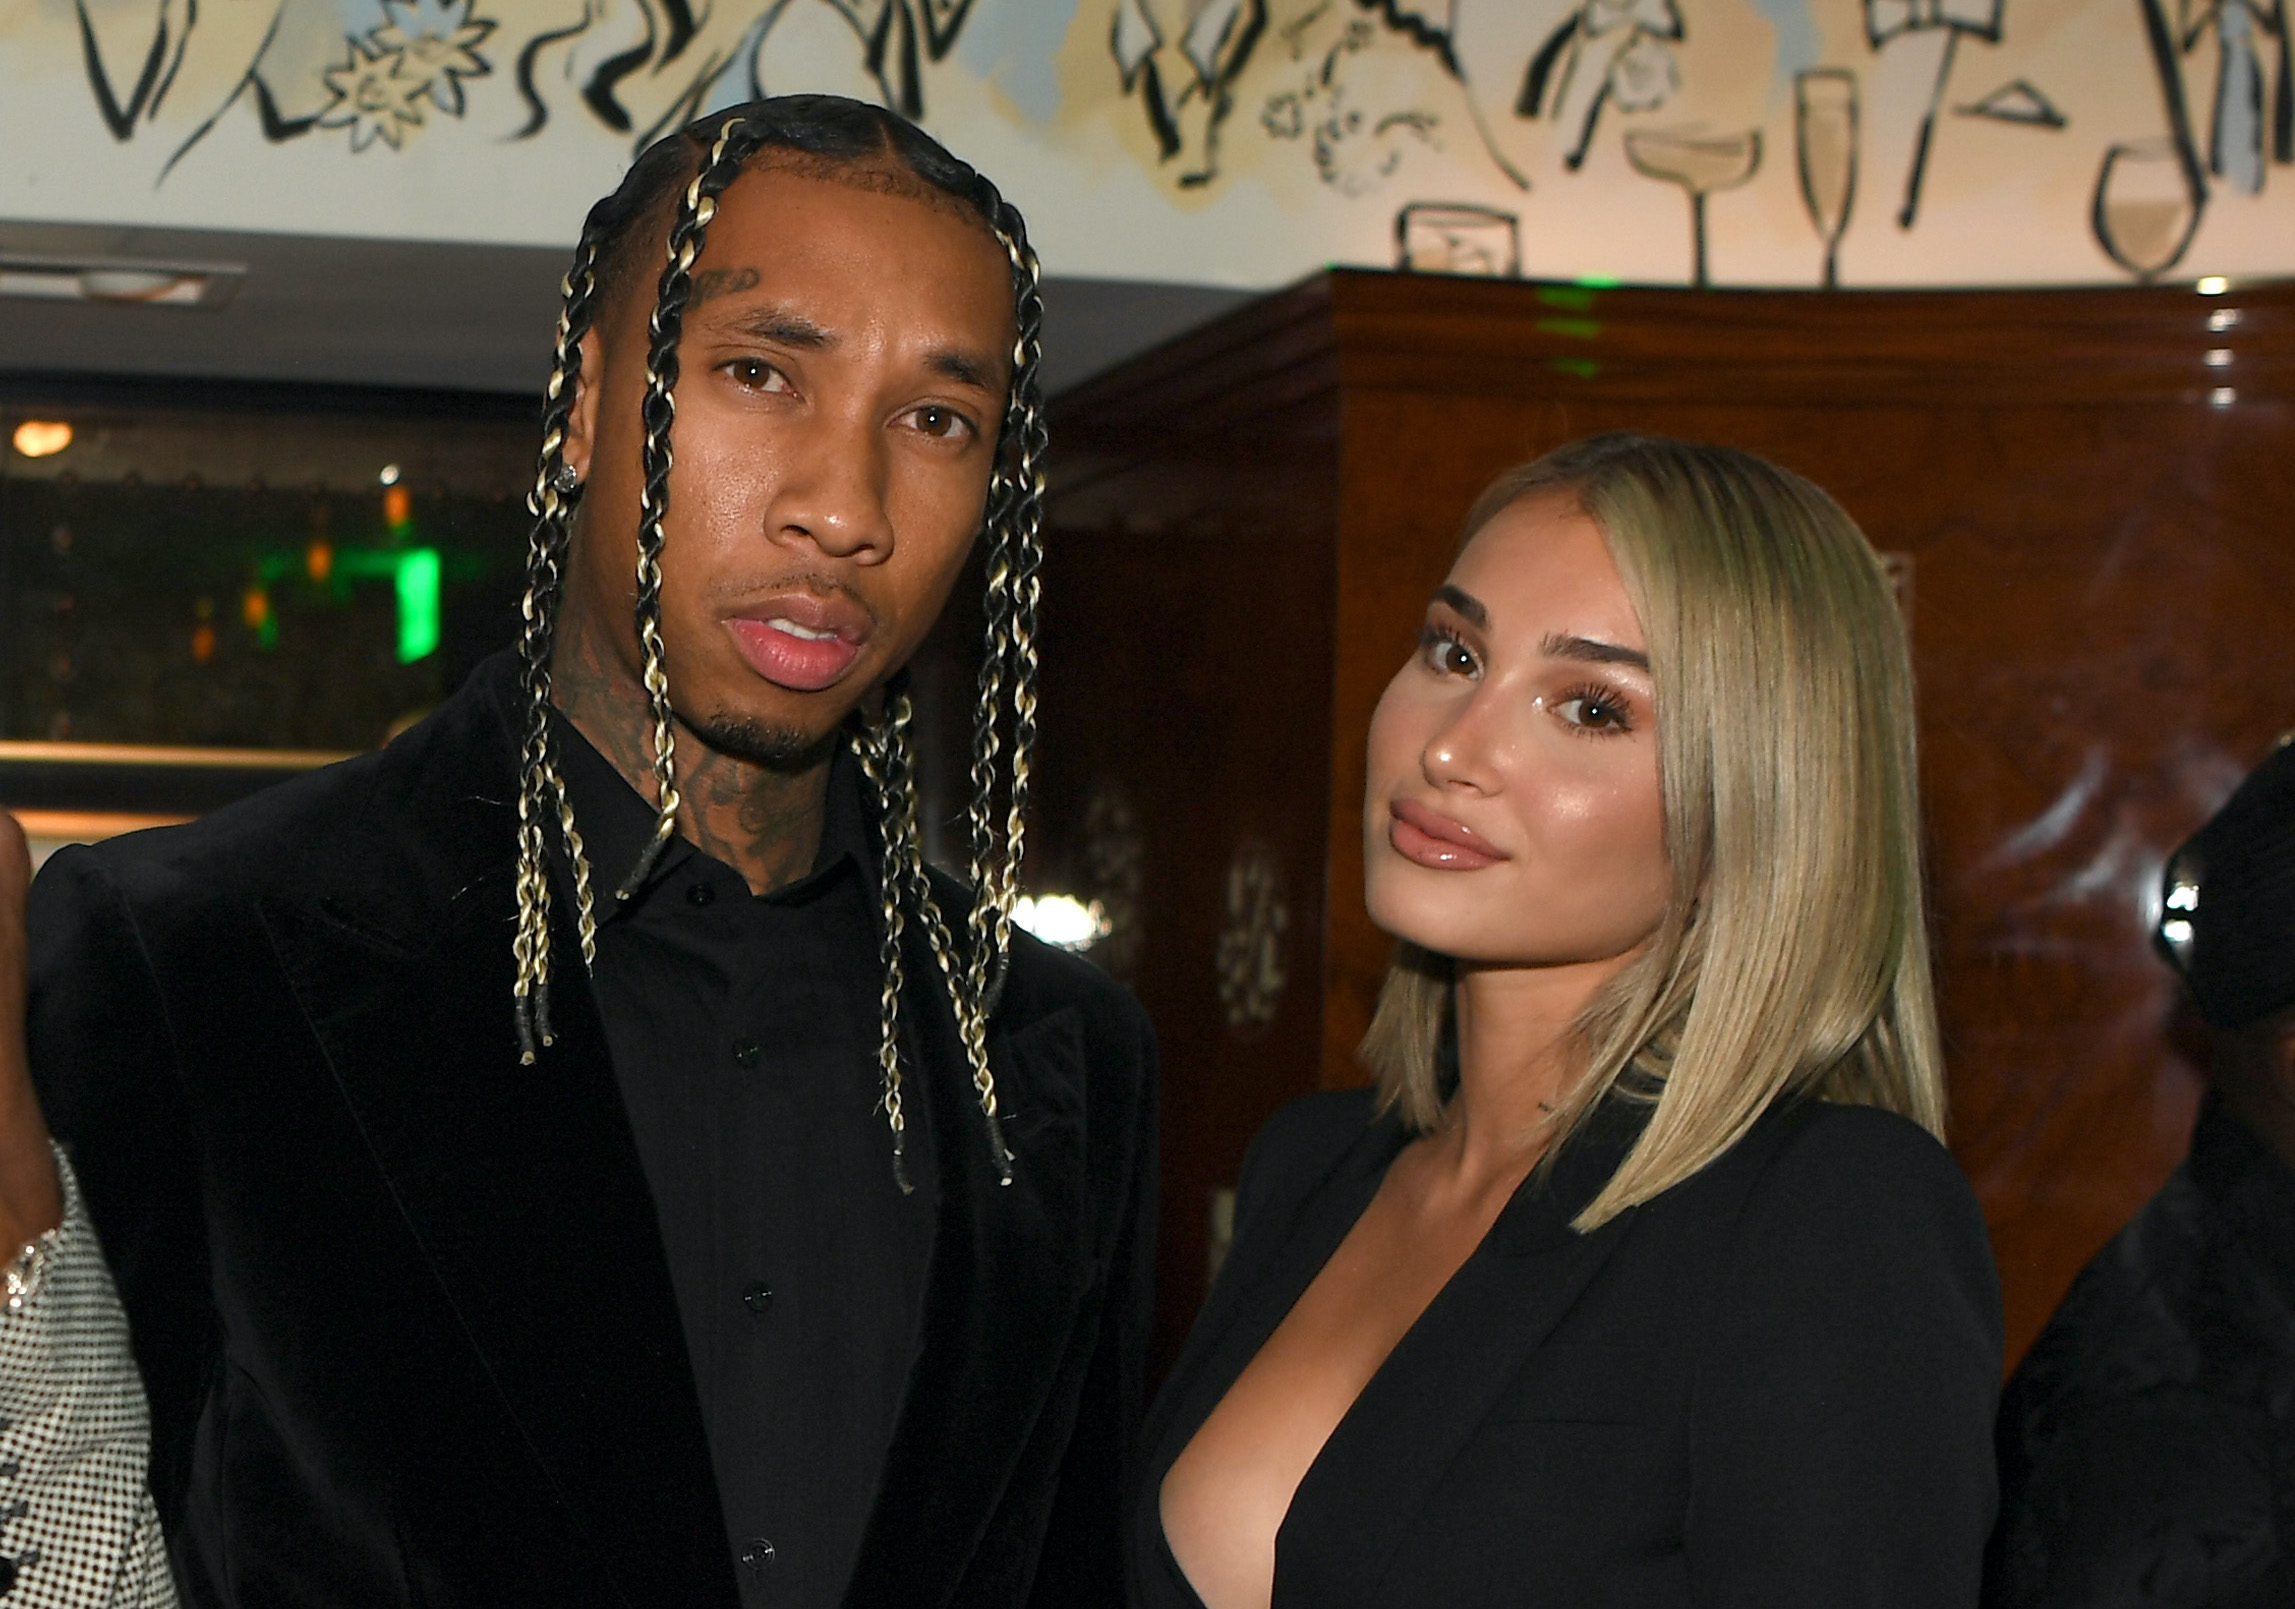 Tyga Turns Himself In To Police Over Domestic Abuse Allegations: Report